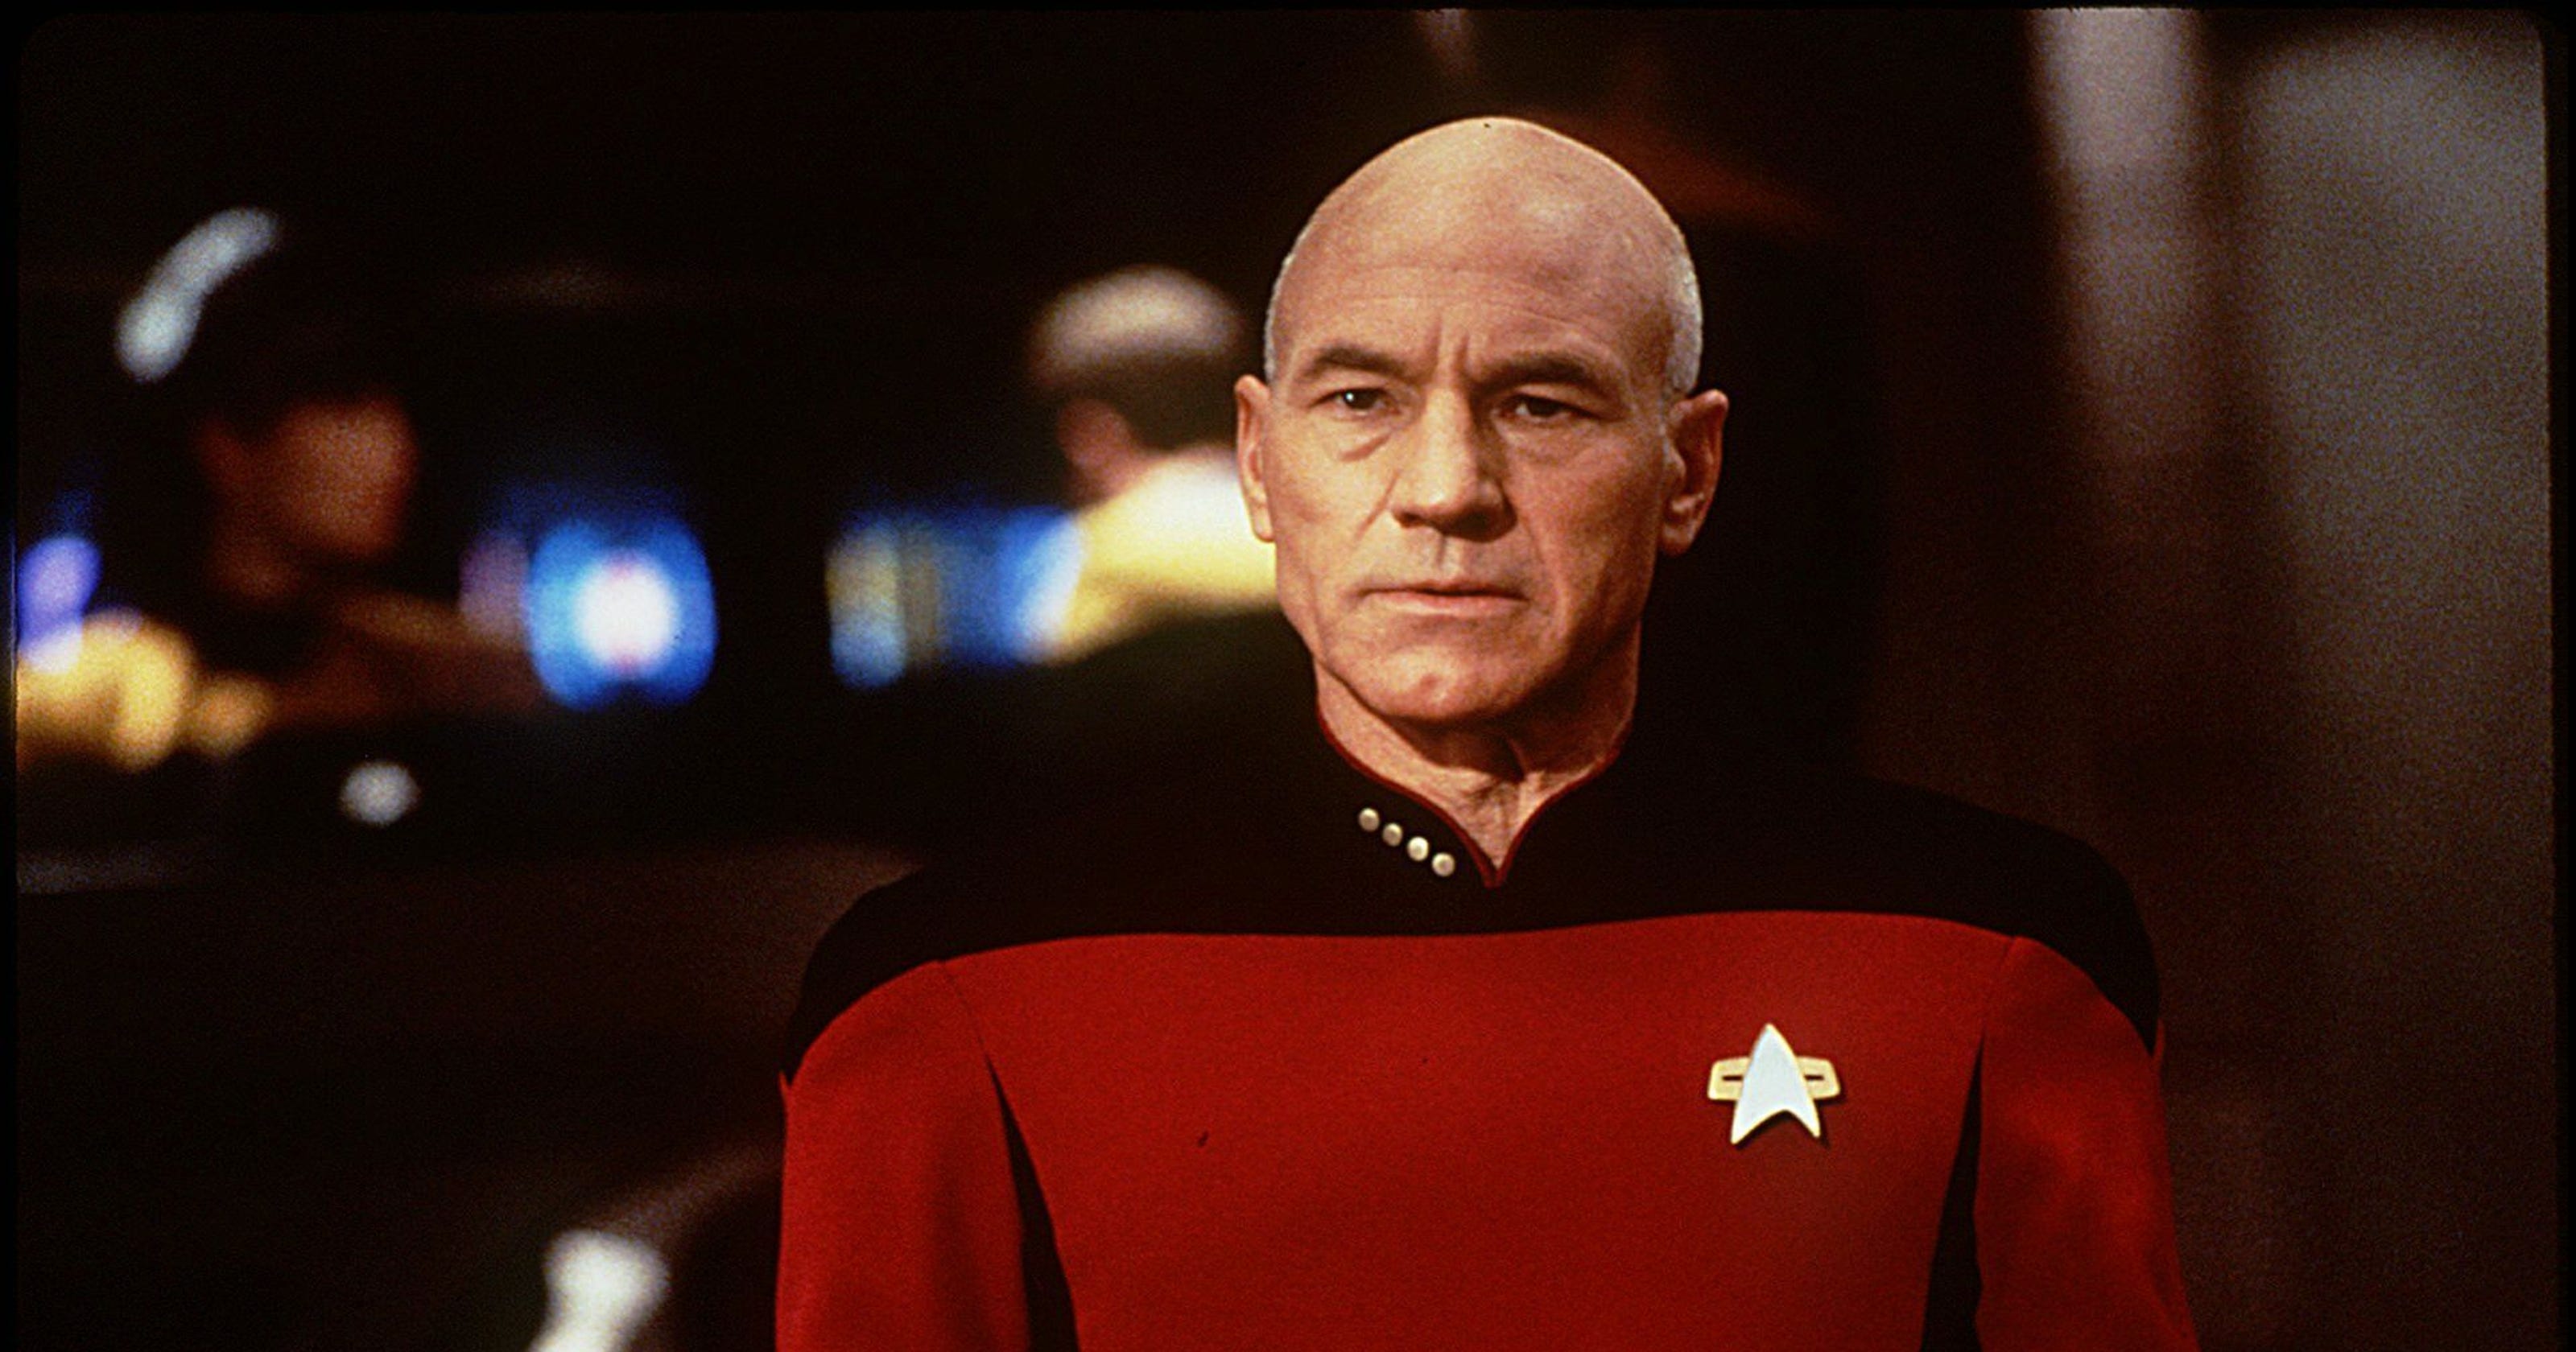 star trek movies with jean luc picard